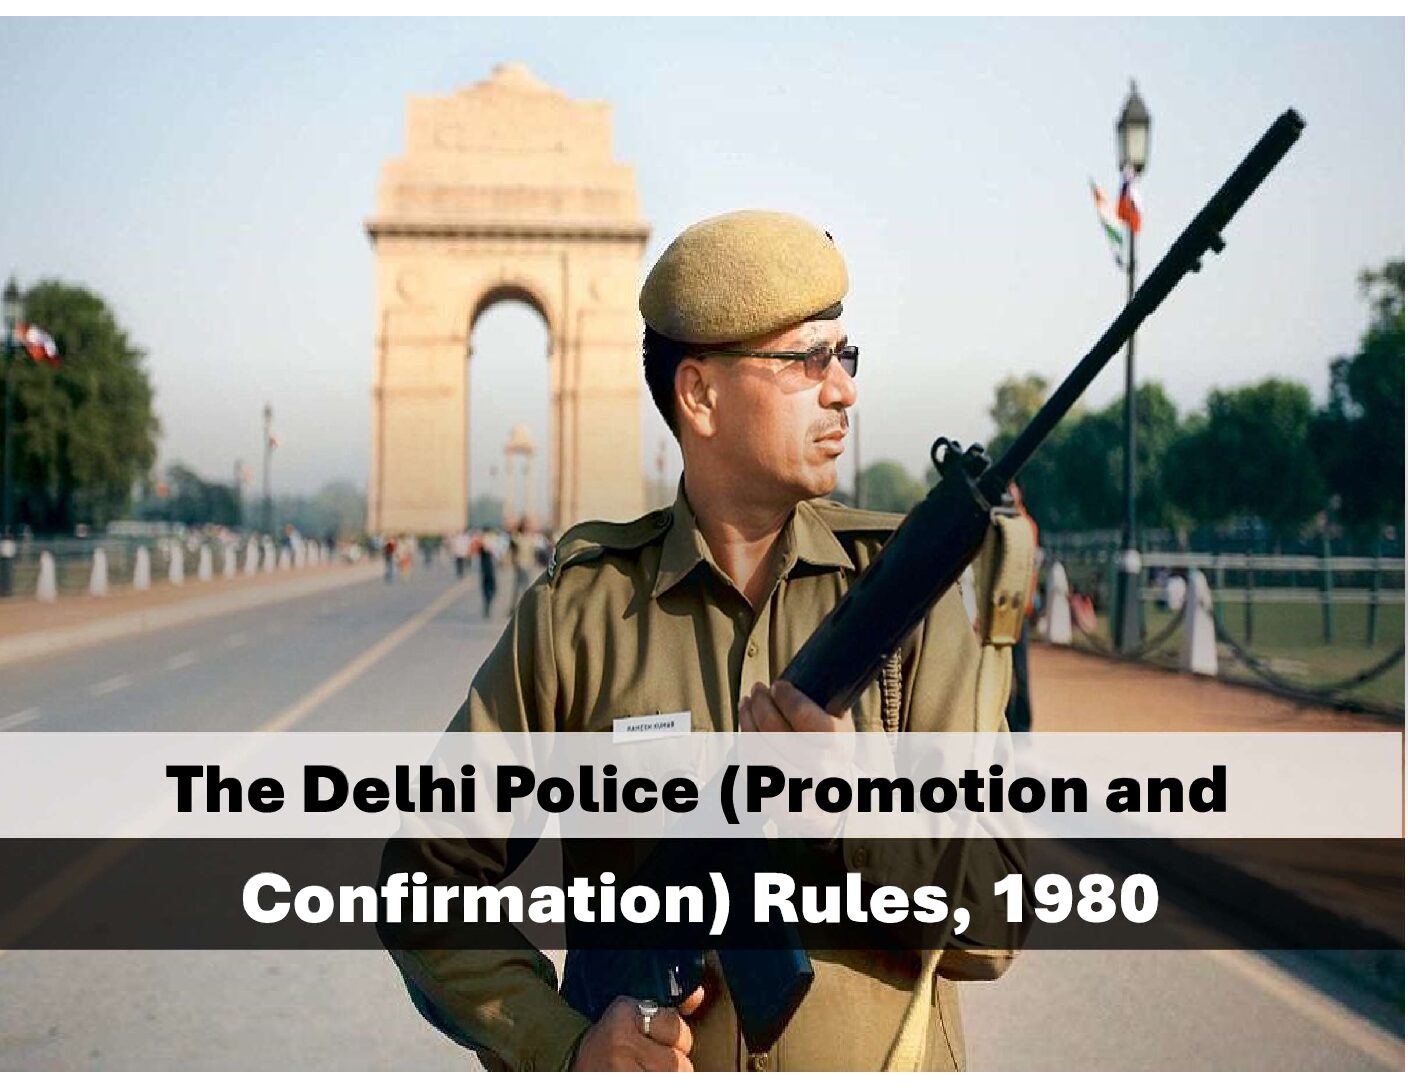 The Delhi Police (Promotion and Confirmation) Rules, 1980